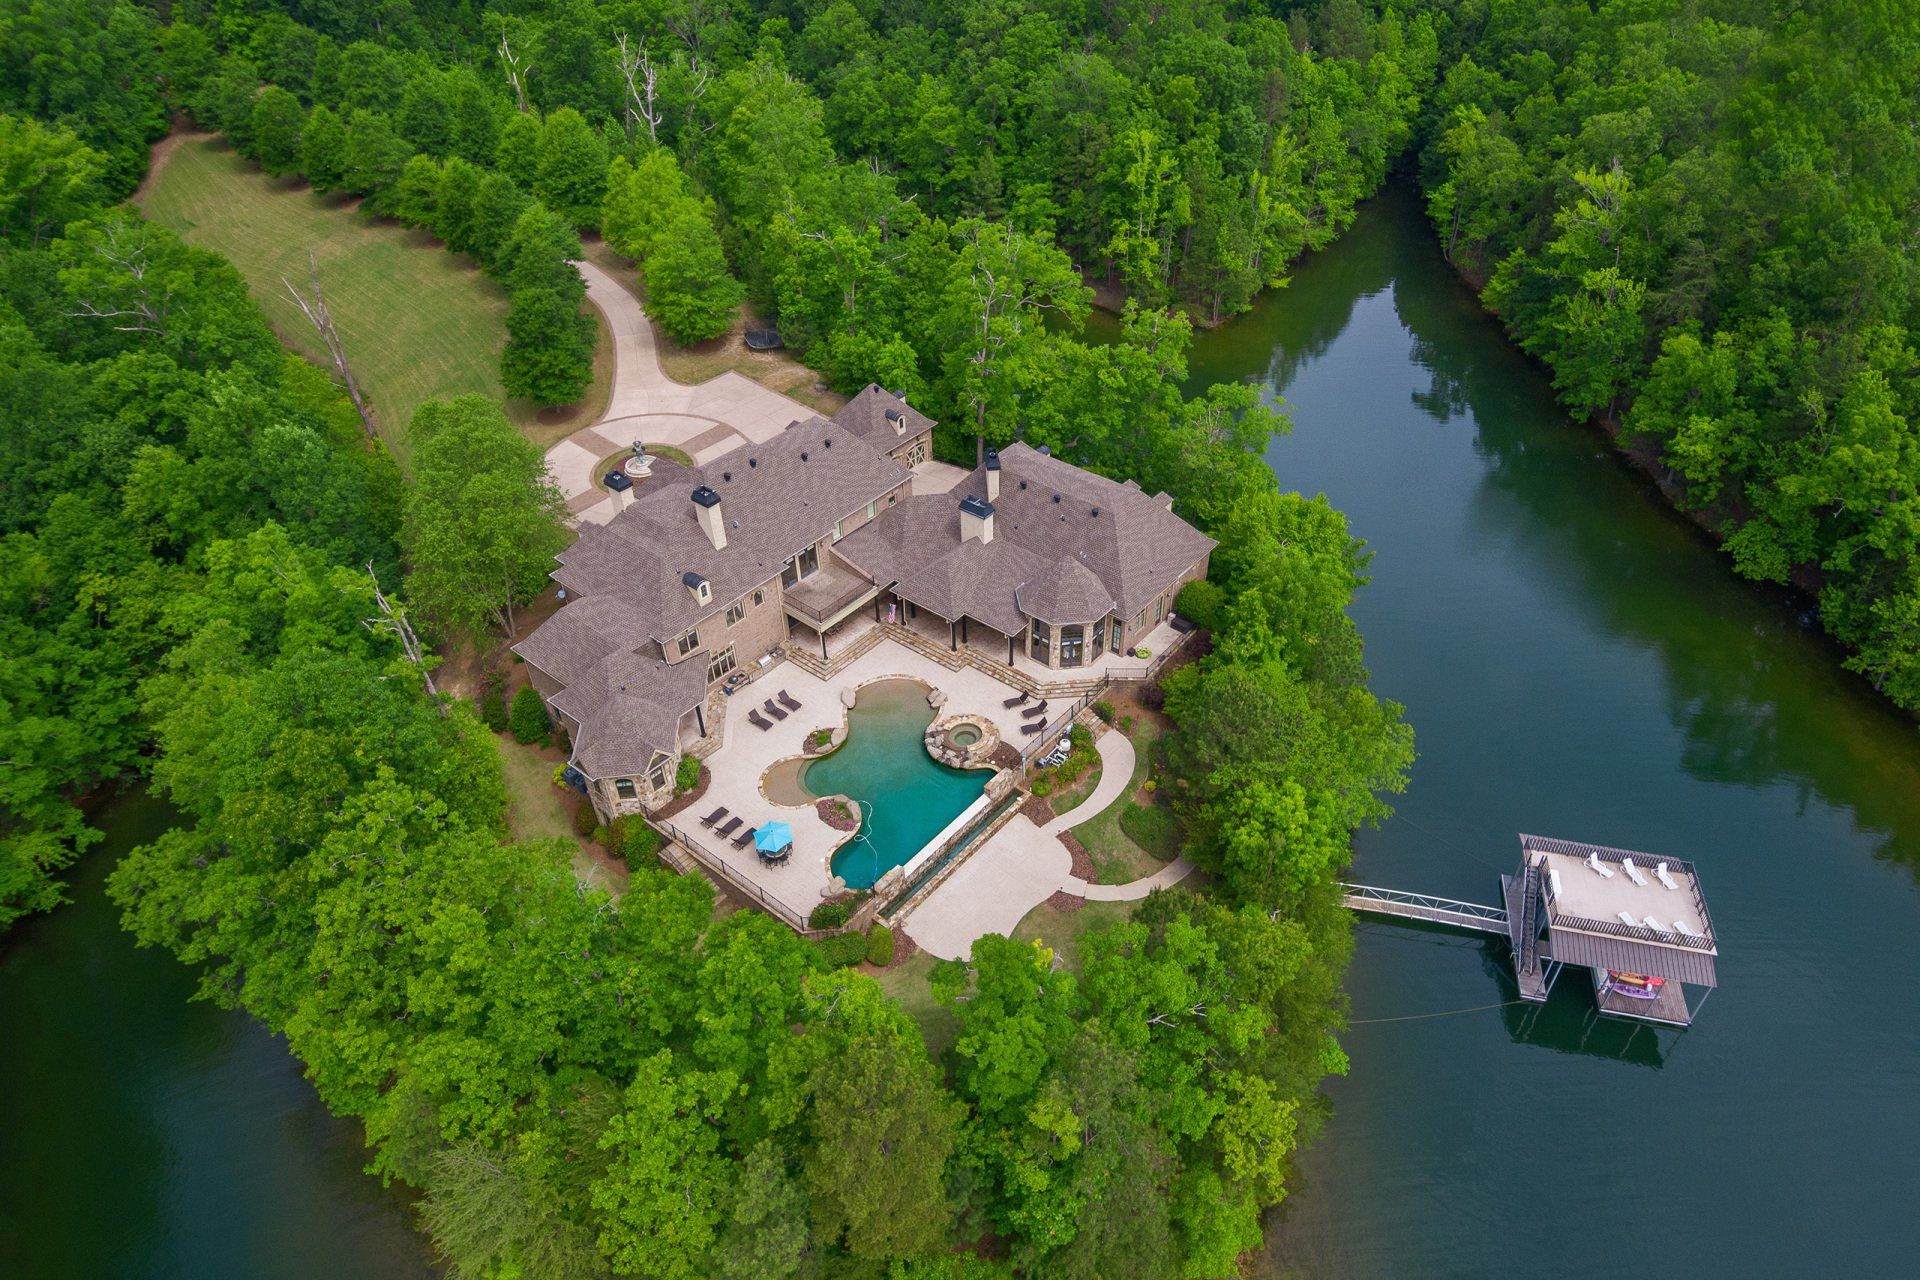 An aerial view of a large house on a small island in the middle of a lake surrounded by trees.